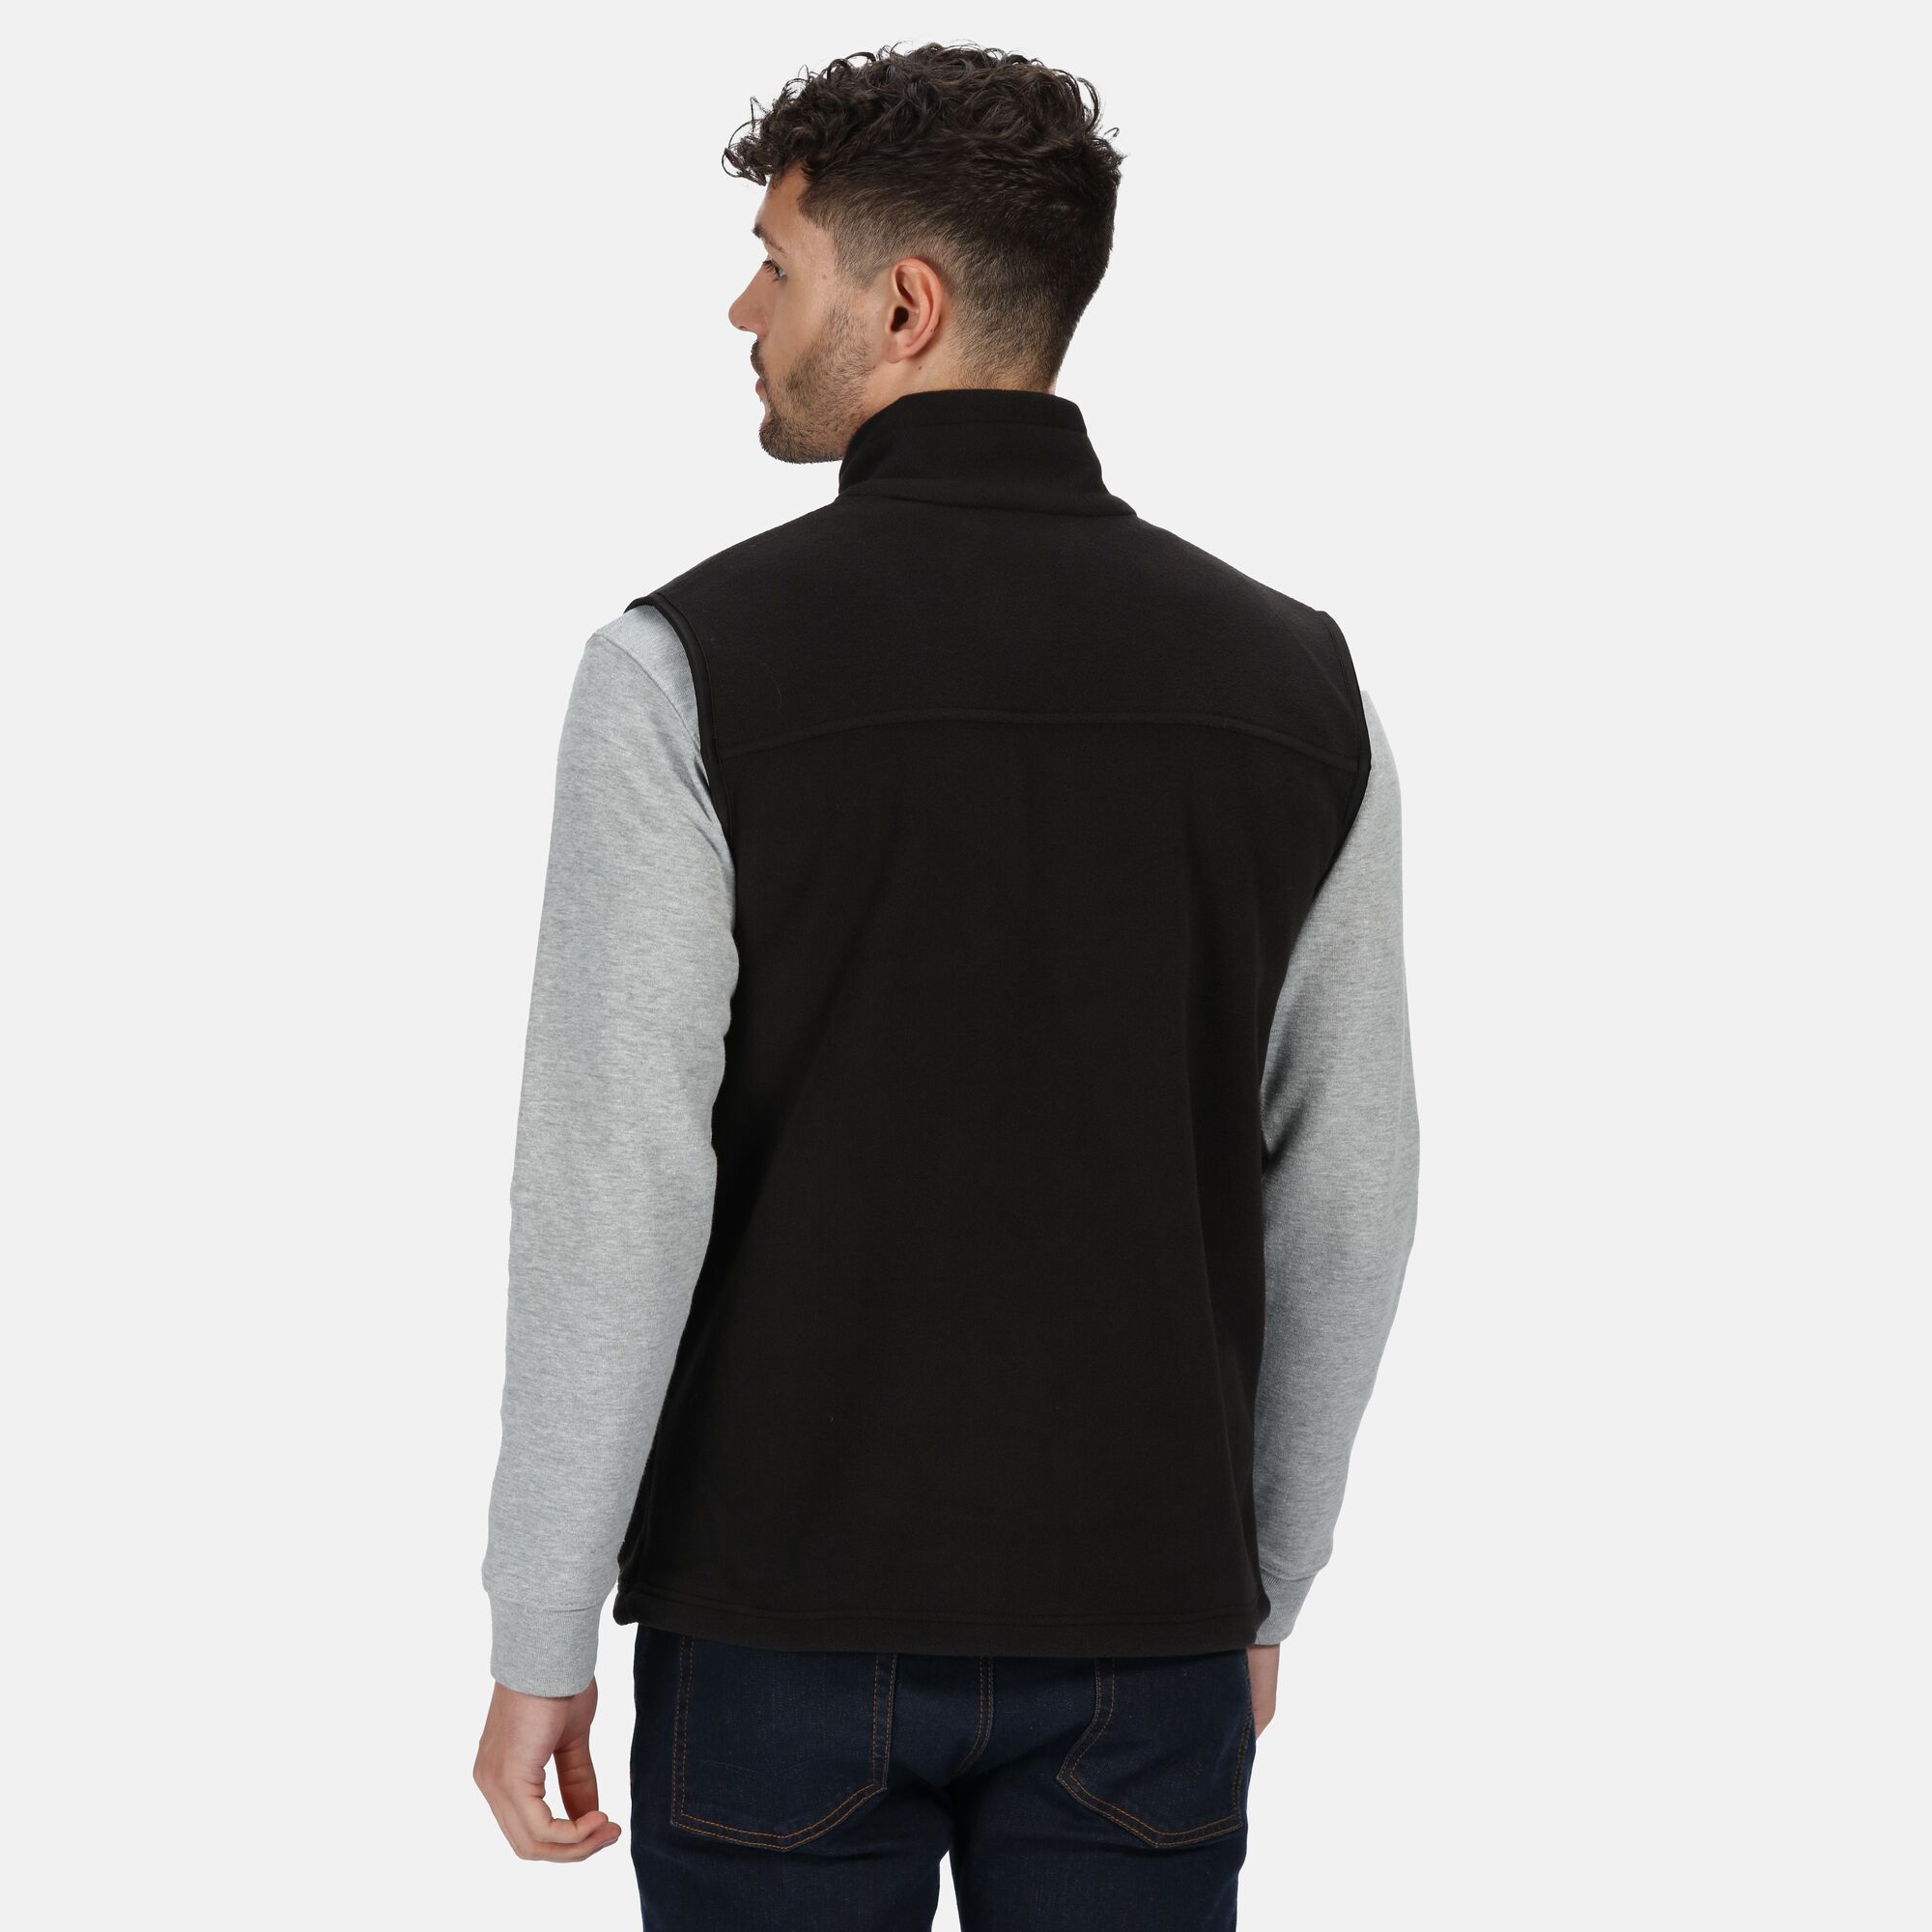 100% Polyester. Elasticated bound armholes. Adjustable shockcord hem. Interactive - ideal to be worn with:. Gibson jacket. Vertex jacket. 2 zipped lower pockets. Symmetry Fleece - lighter weight/greater warmth. Weight: 250g/m. Fabric: 250 series anti-pill Symmetry fleece. S (38: To Fit (ins)). M (40: To Fit (ins)). L (42: To Fit (ins)). XL (44: To Fit (ins)). 2XL (47: To Fit (ins)).